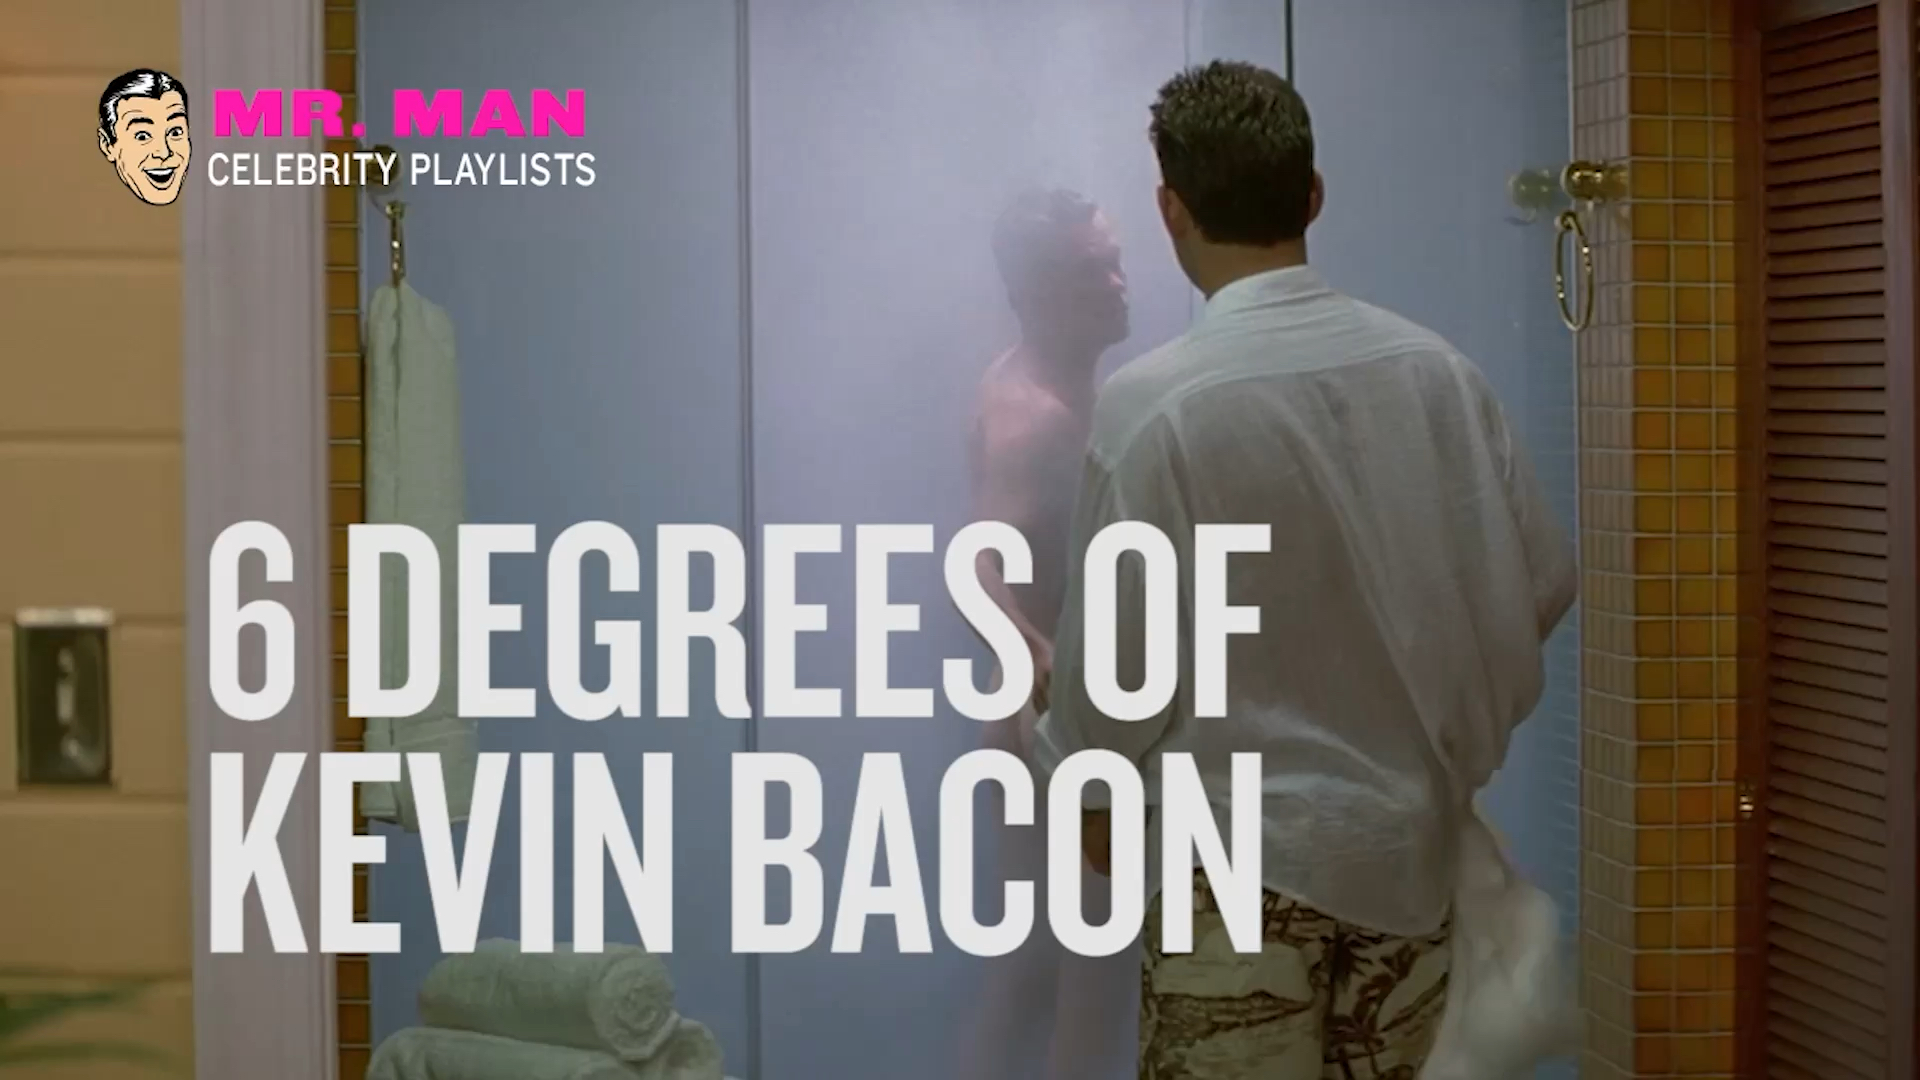 6 Degrees of Kevin Bacon